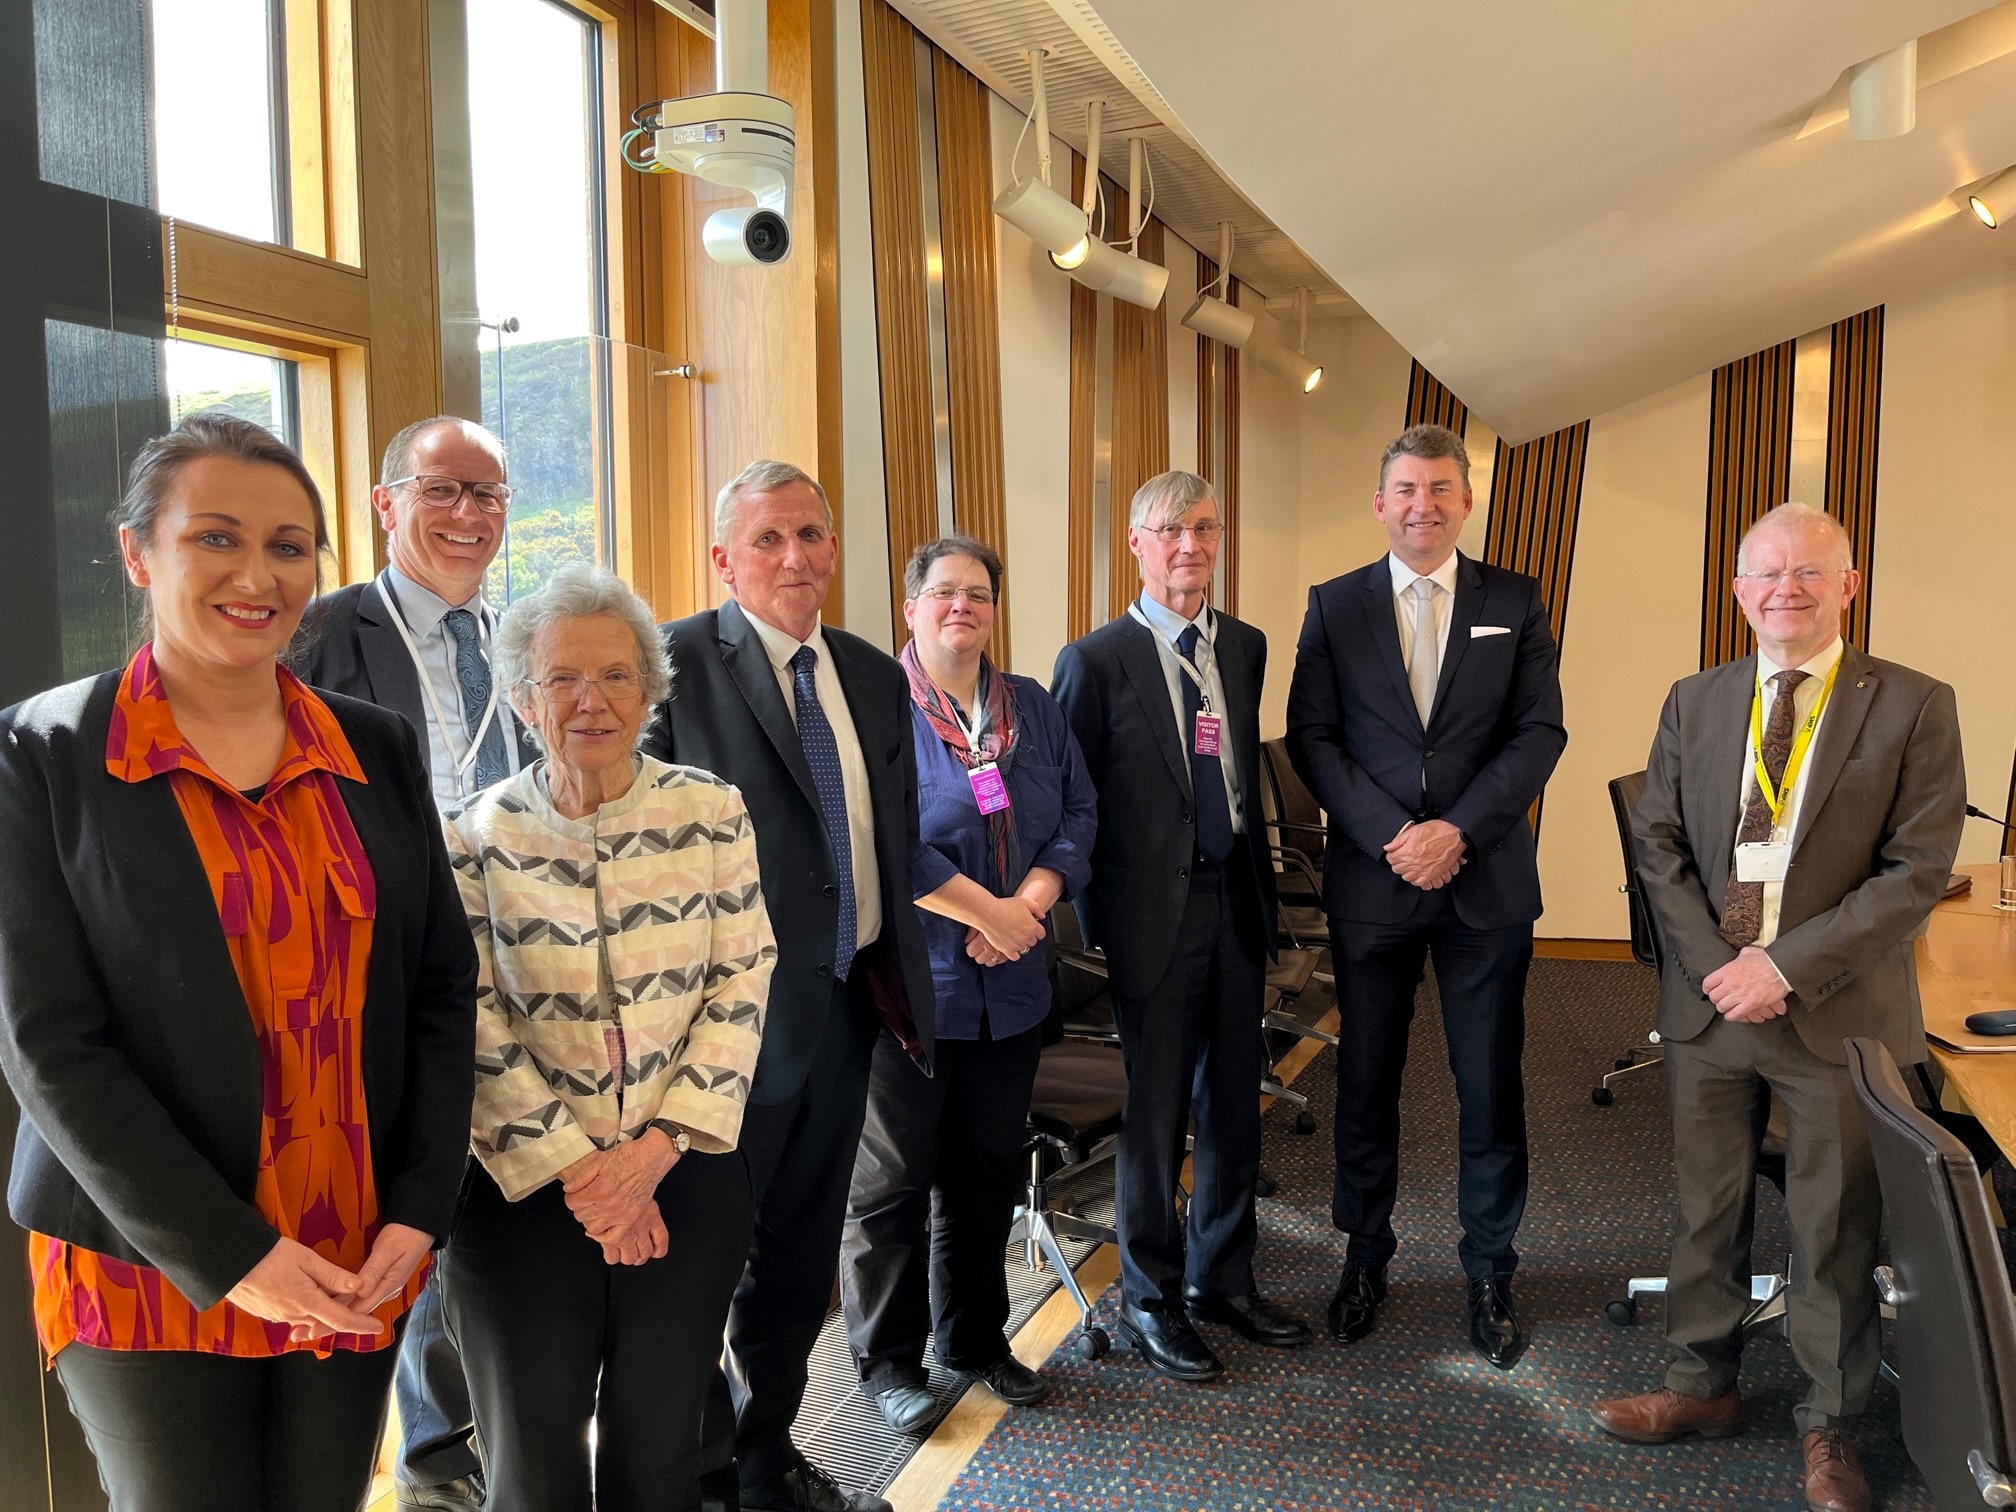 Committee members meeting with Fellows of the Royal Society of Edinburgh in the Scottish Parliament on 19 May 2022.